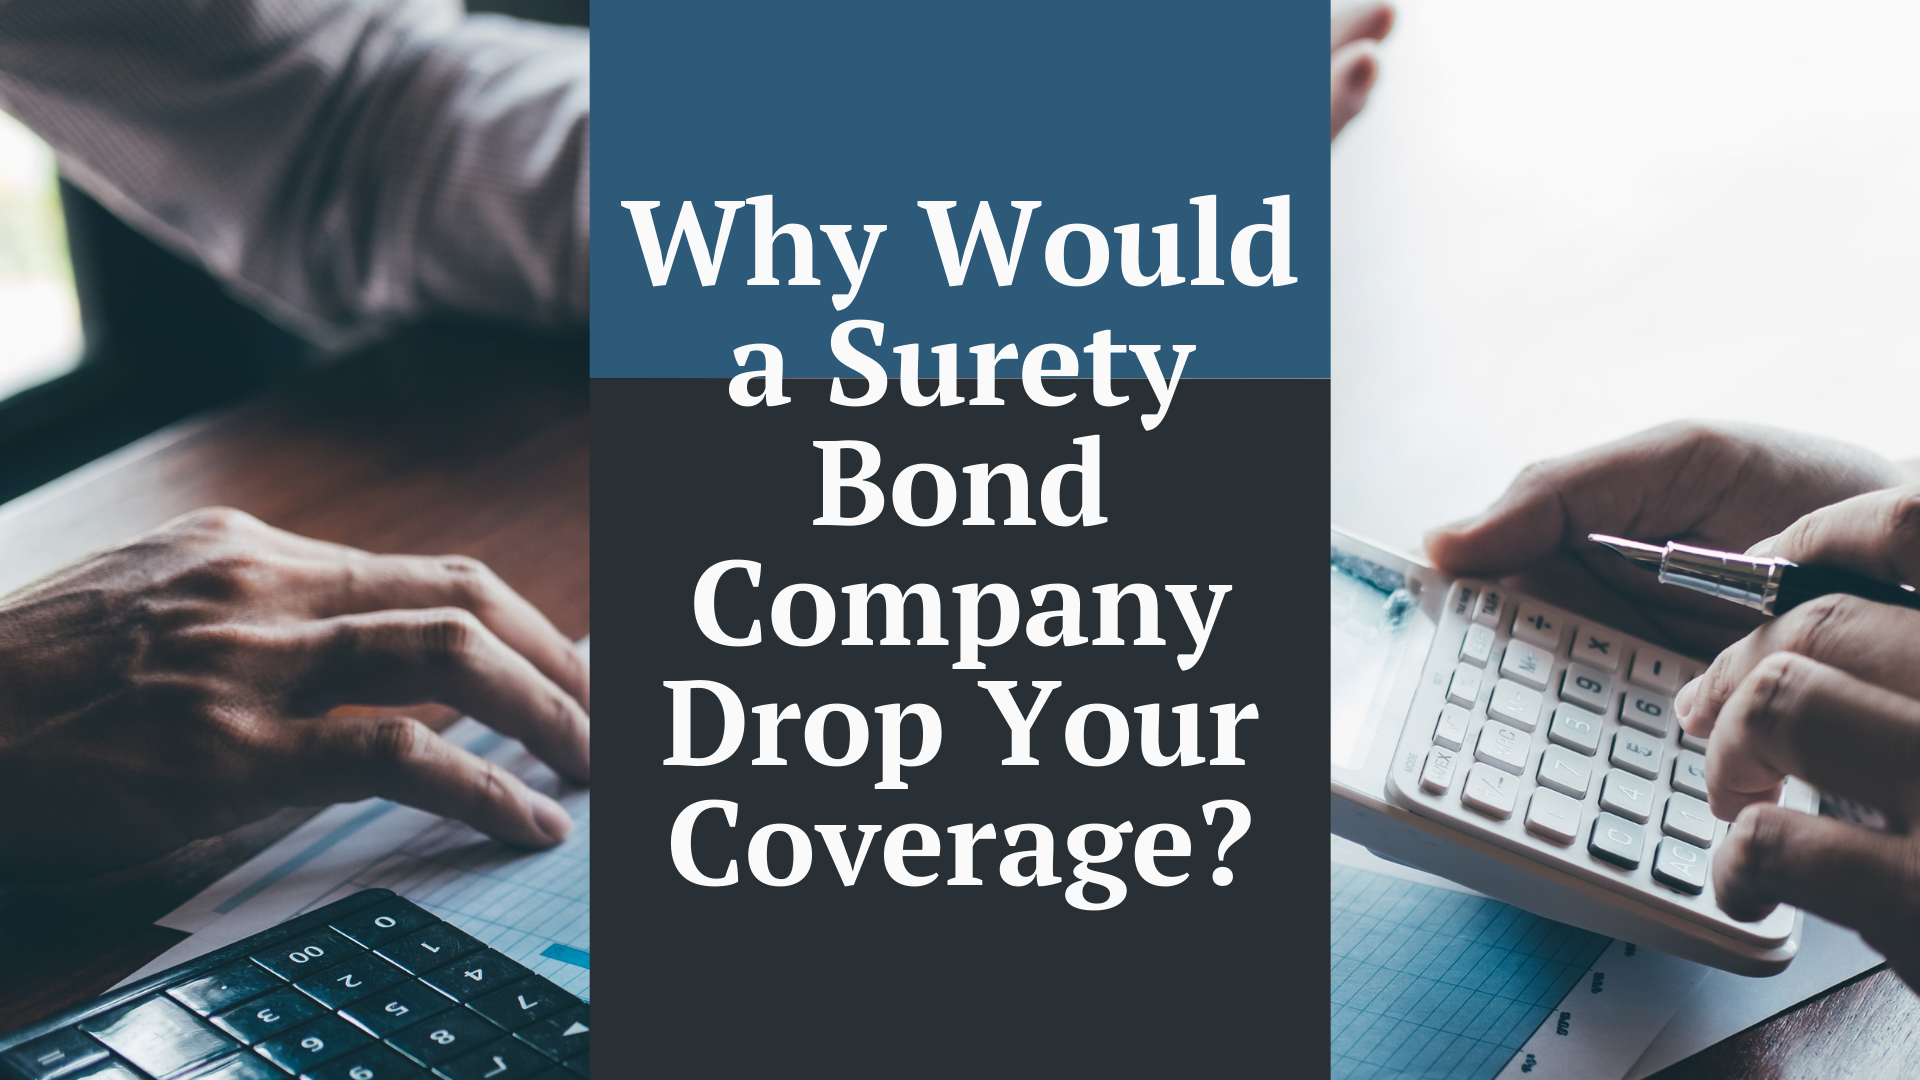 surety bond - What are the possible reasons why a surety bond company would drop my coverage - working